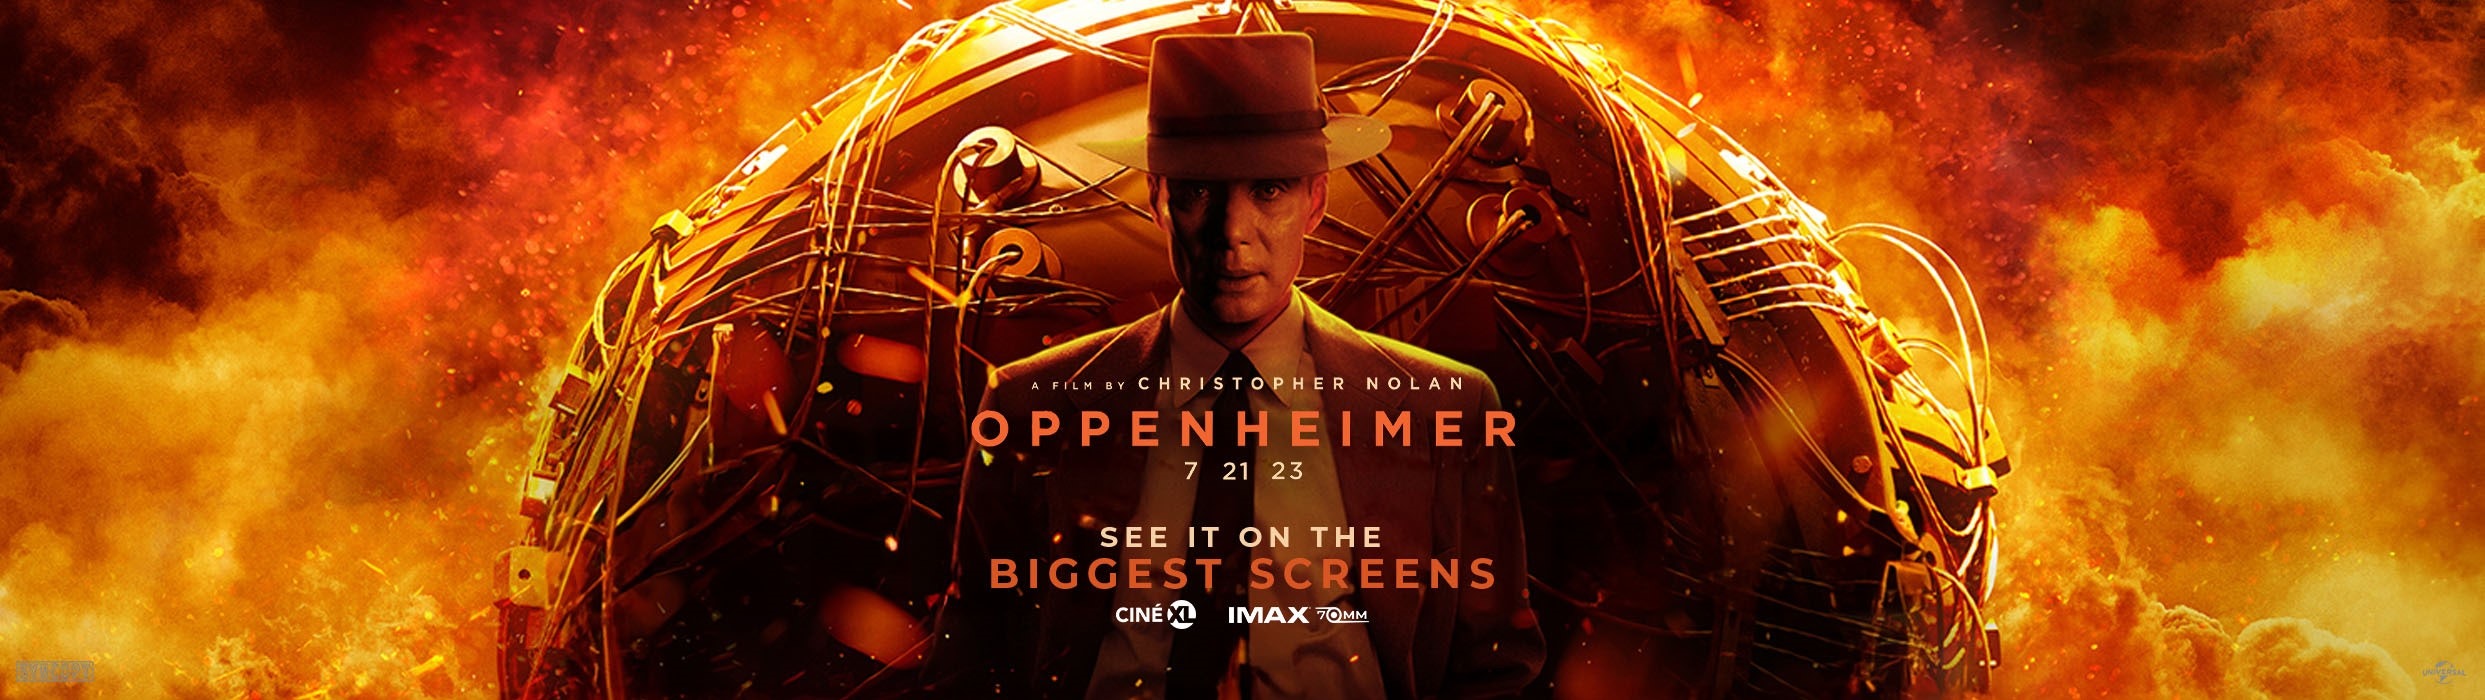 Man stands in from of the Atom bomb in Christopher Nolan's Oppenheimer coming to Harkins July 21 in IMAX & CINE XL. Get tickets now at Harkins!